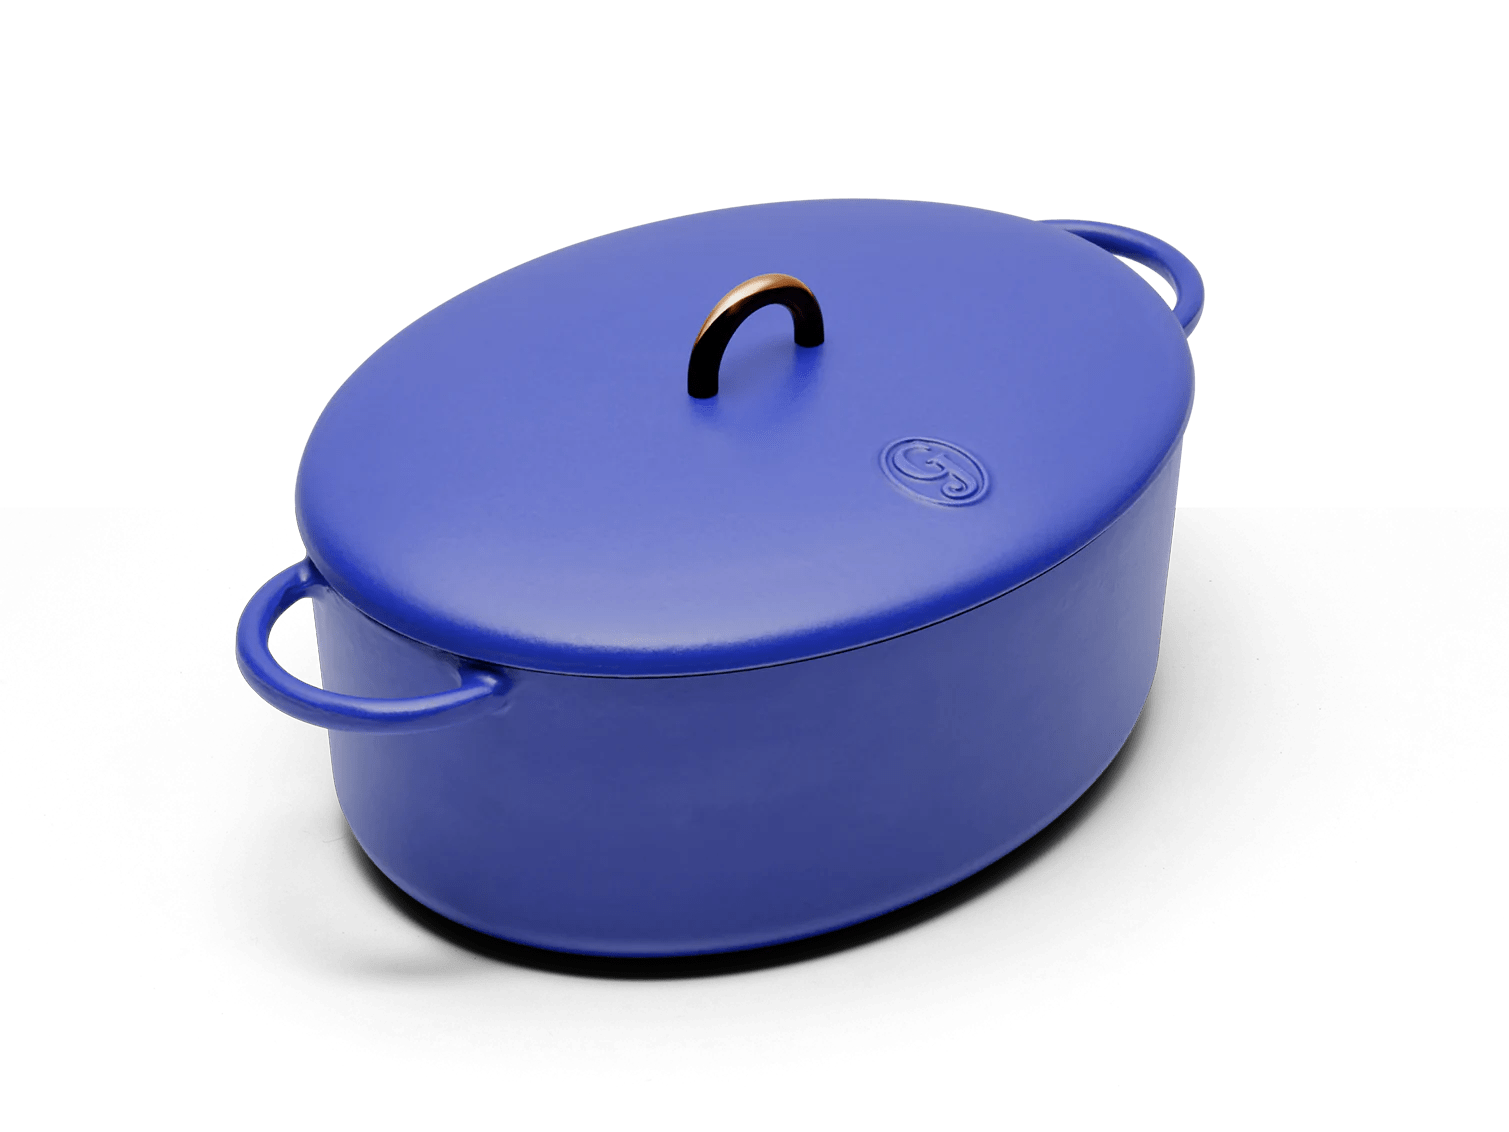 Big Dutch Oven Jones in blue on a white background